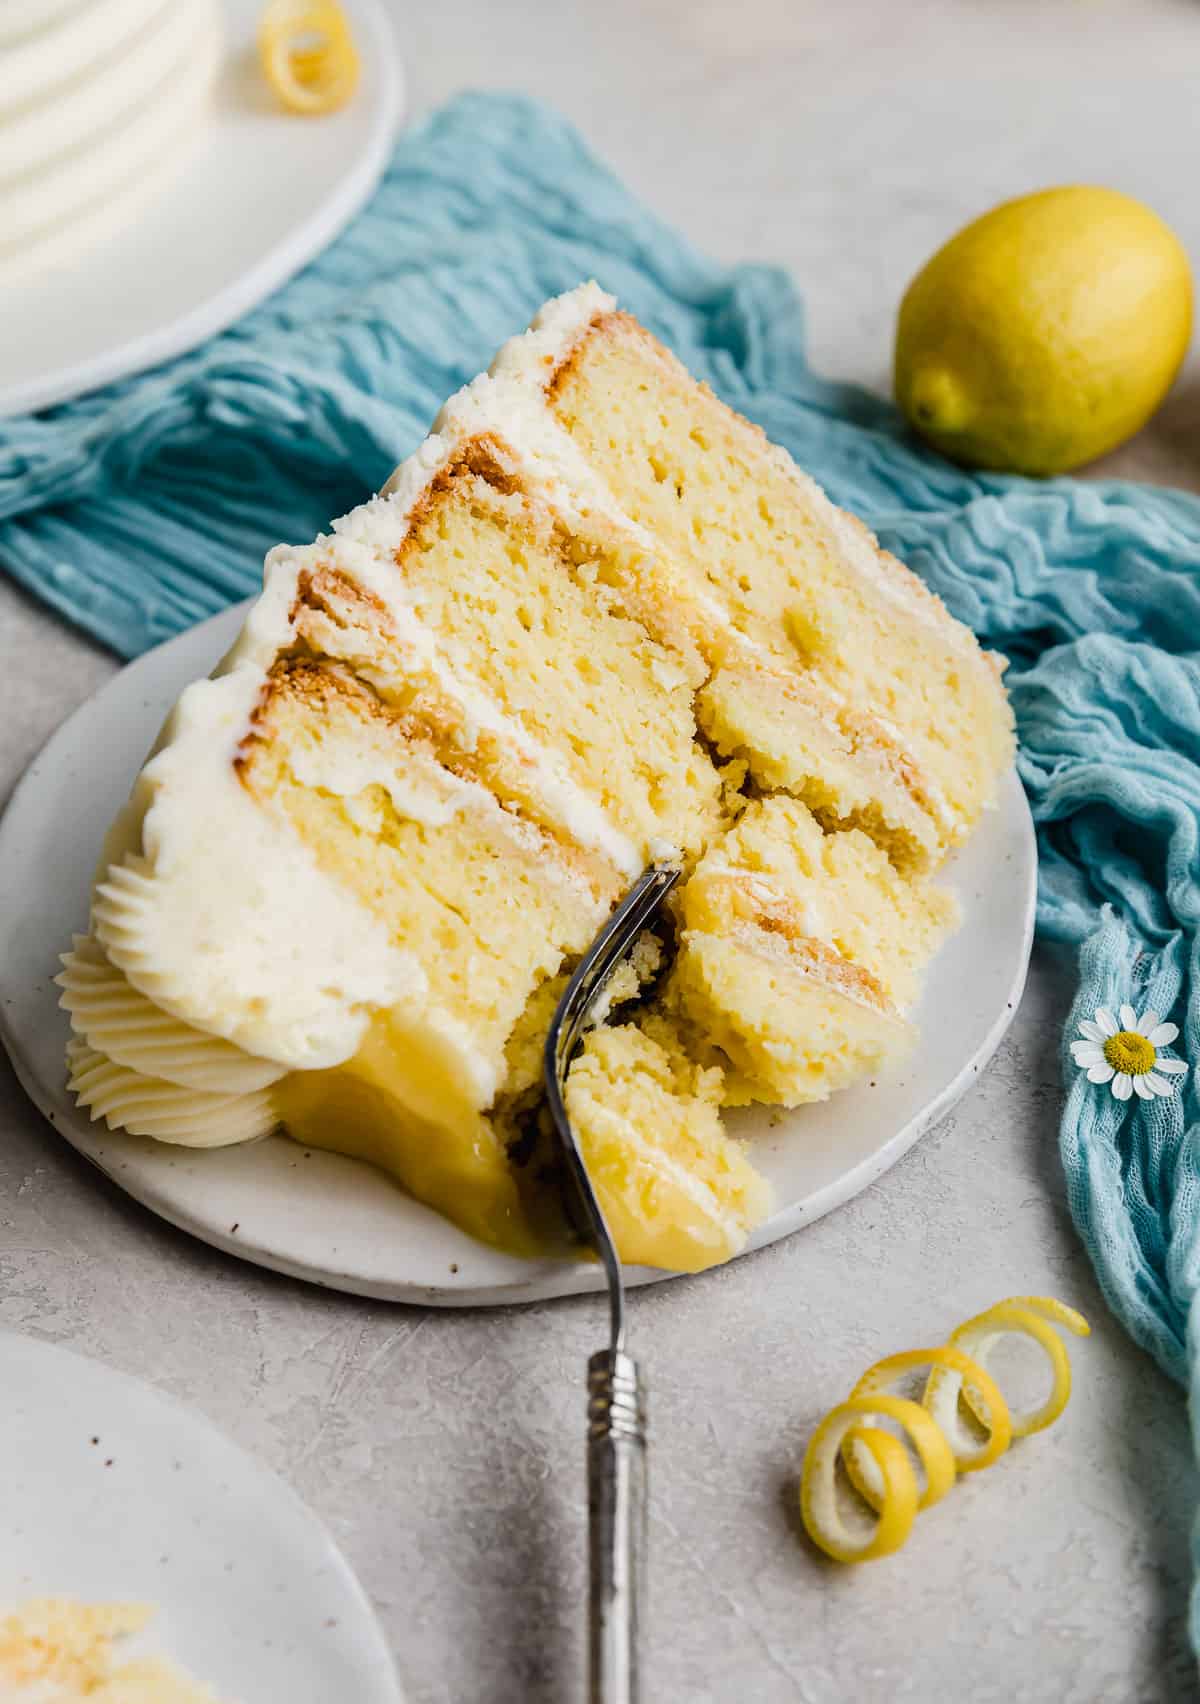 A slice of layered Lemon Bar Cake on a plate with a fork cutting into the cake.